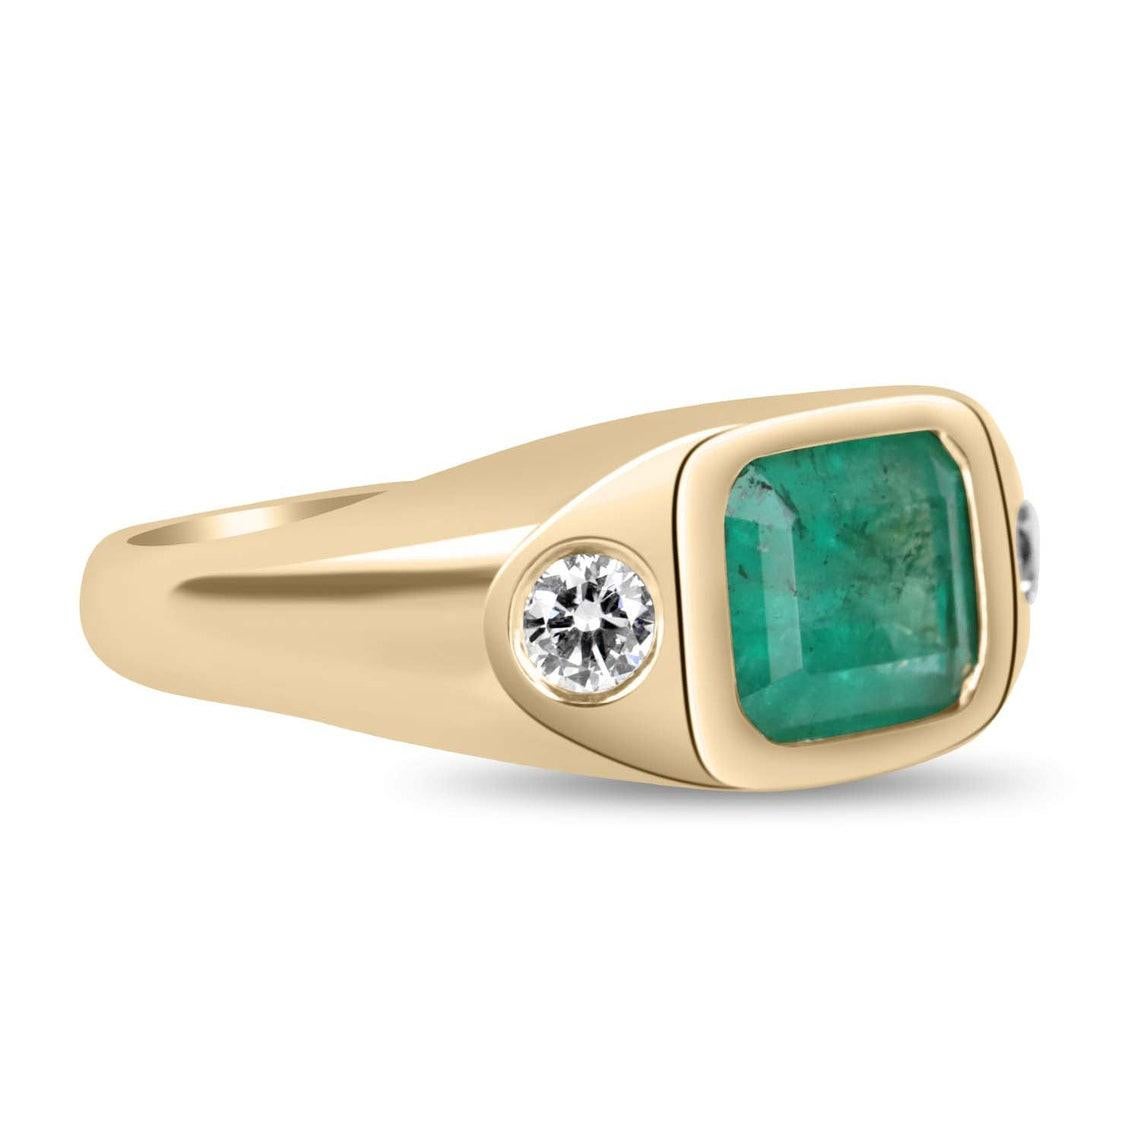 A Colombian emerald and diamond gypsy-styled ring. Dexterously handcrafted in gleaming 14K yellow gold, this ring features a 3.0-carat natural Colombian emerald, emerald cut from the famous Chivor mines. Set in a secure bezel setting for extra